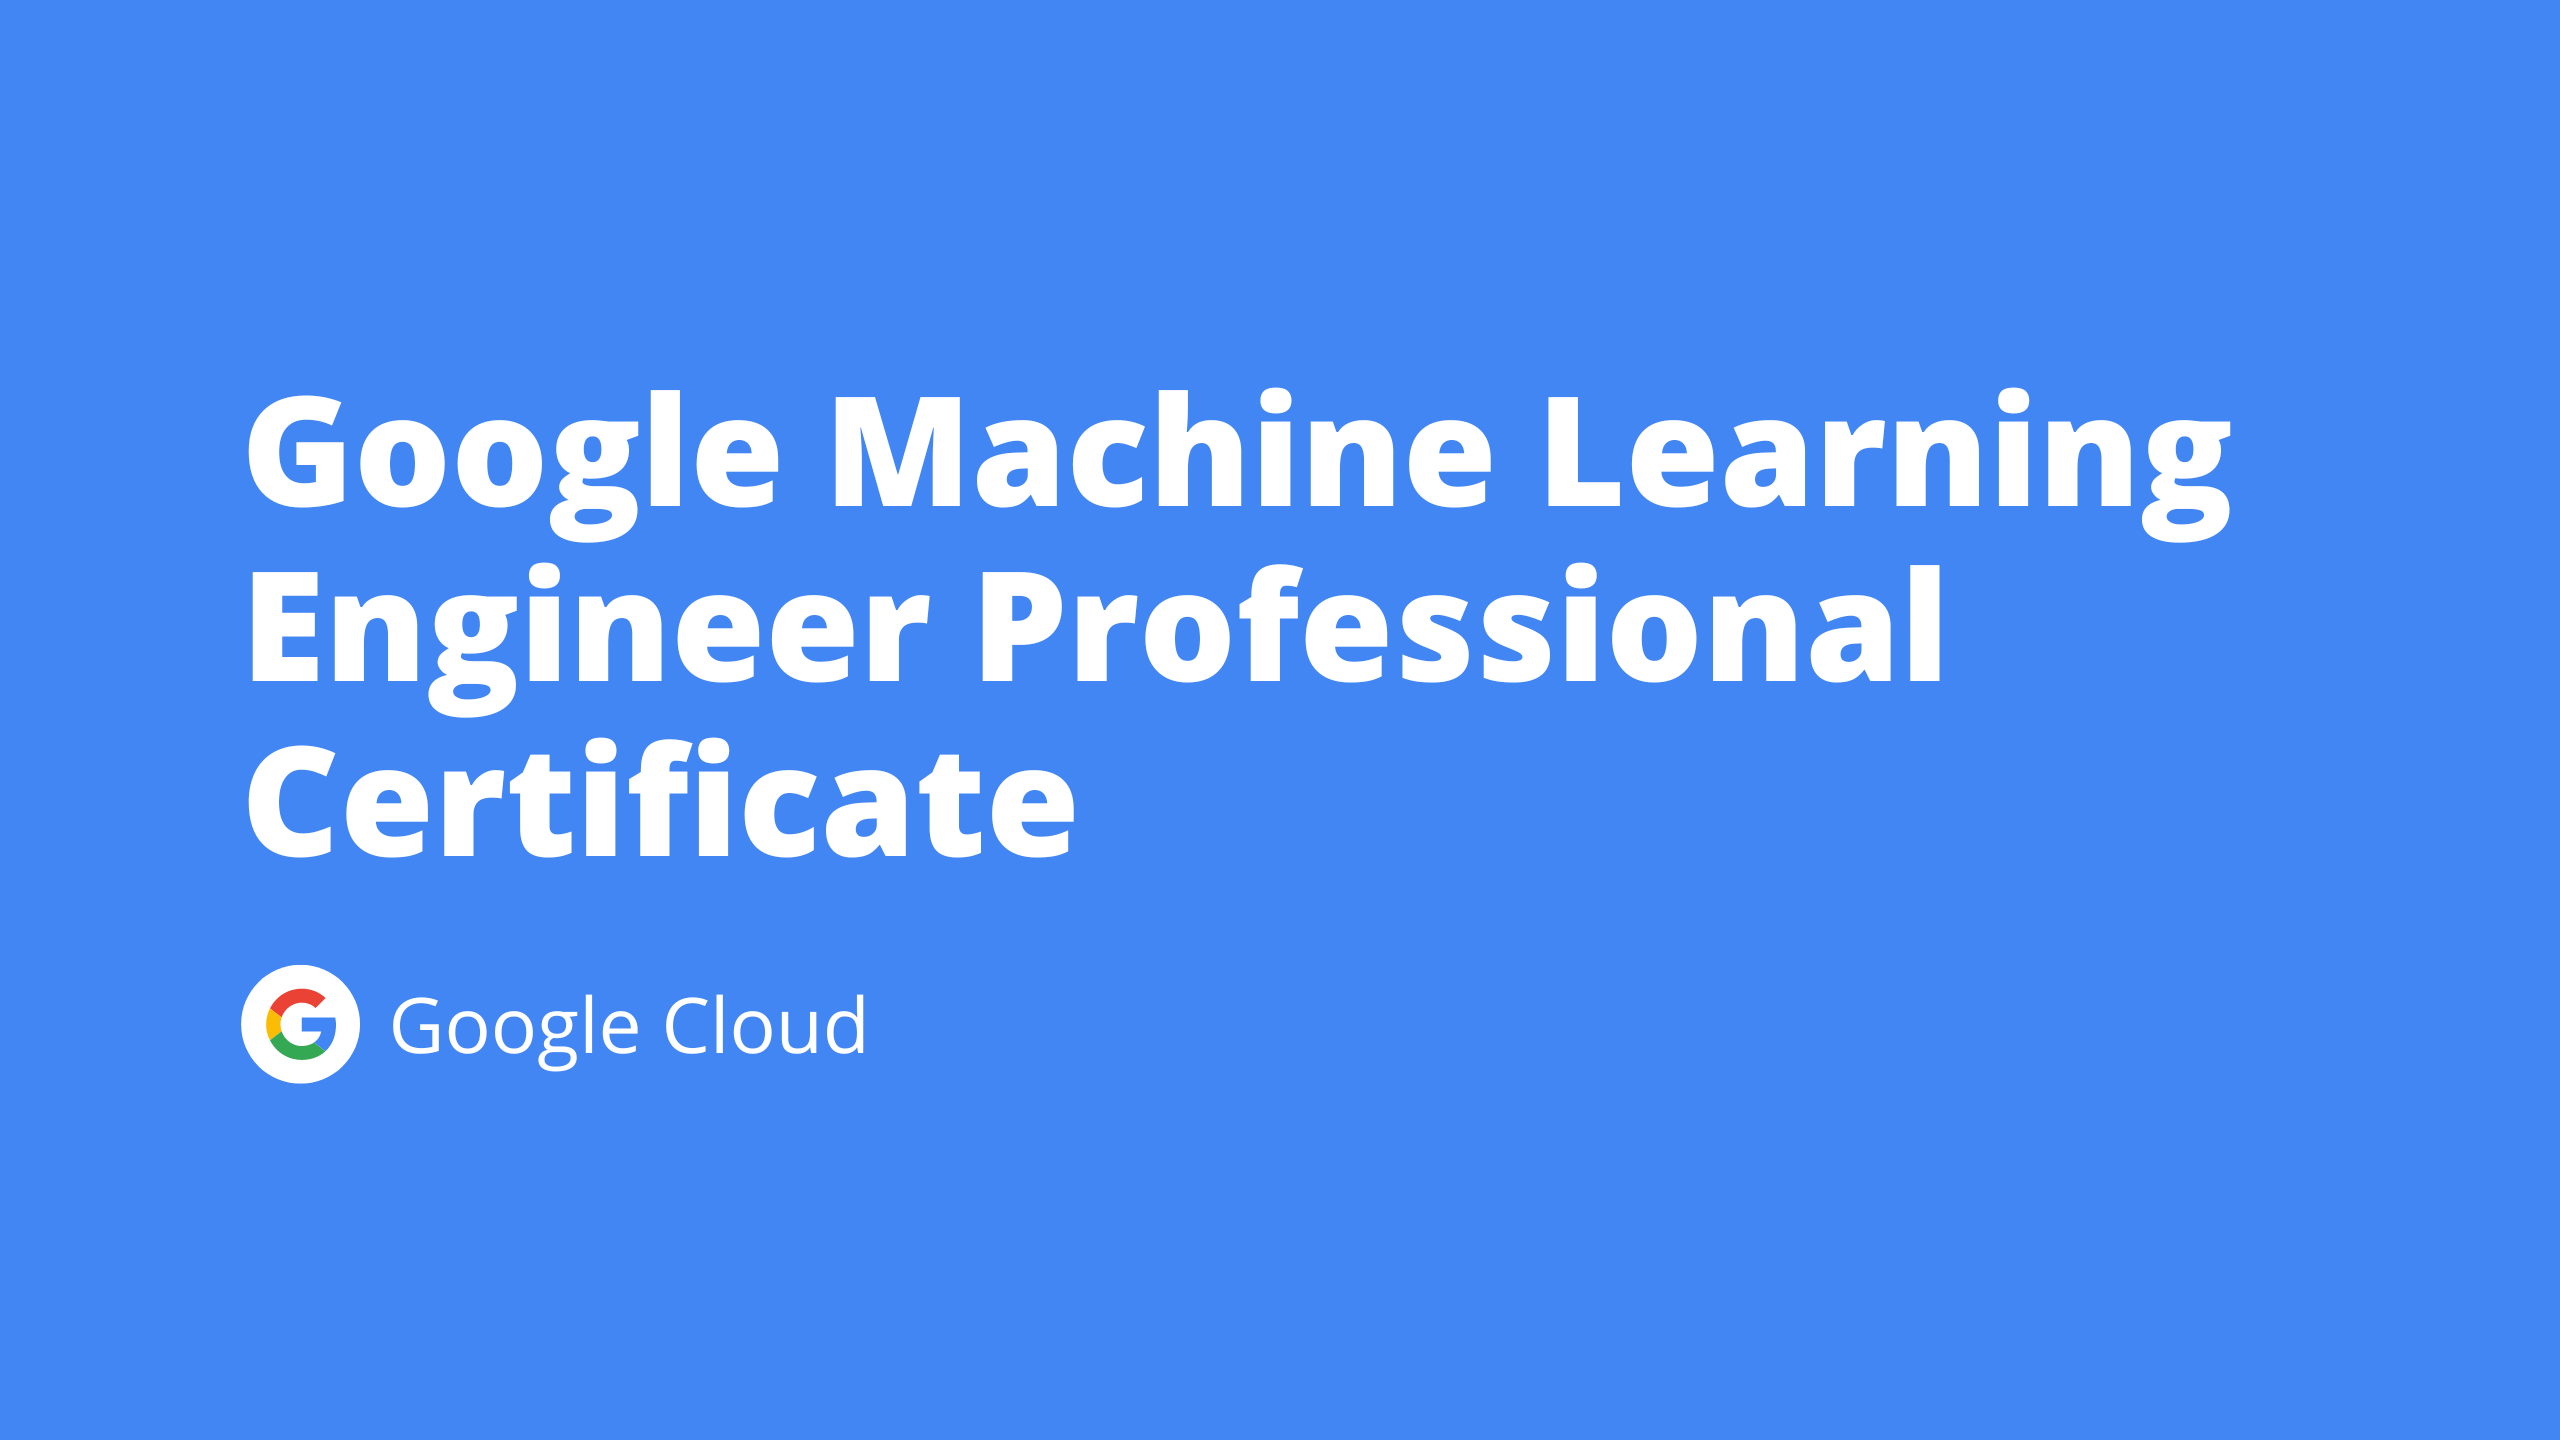 Google Machine Learning Engineer Professional Certificate